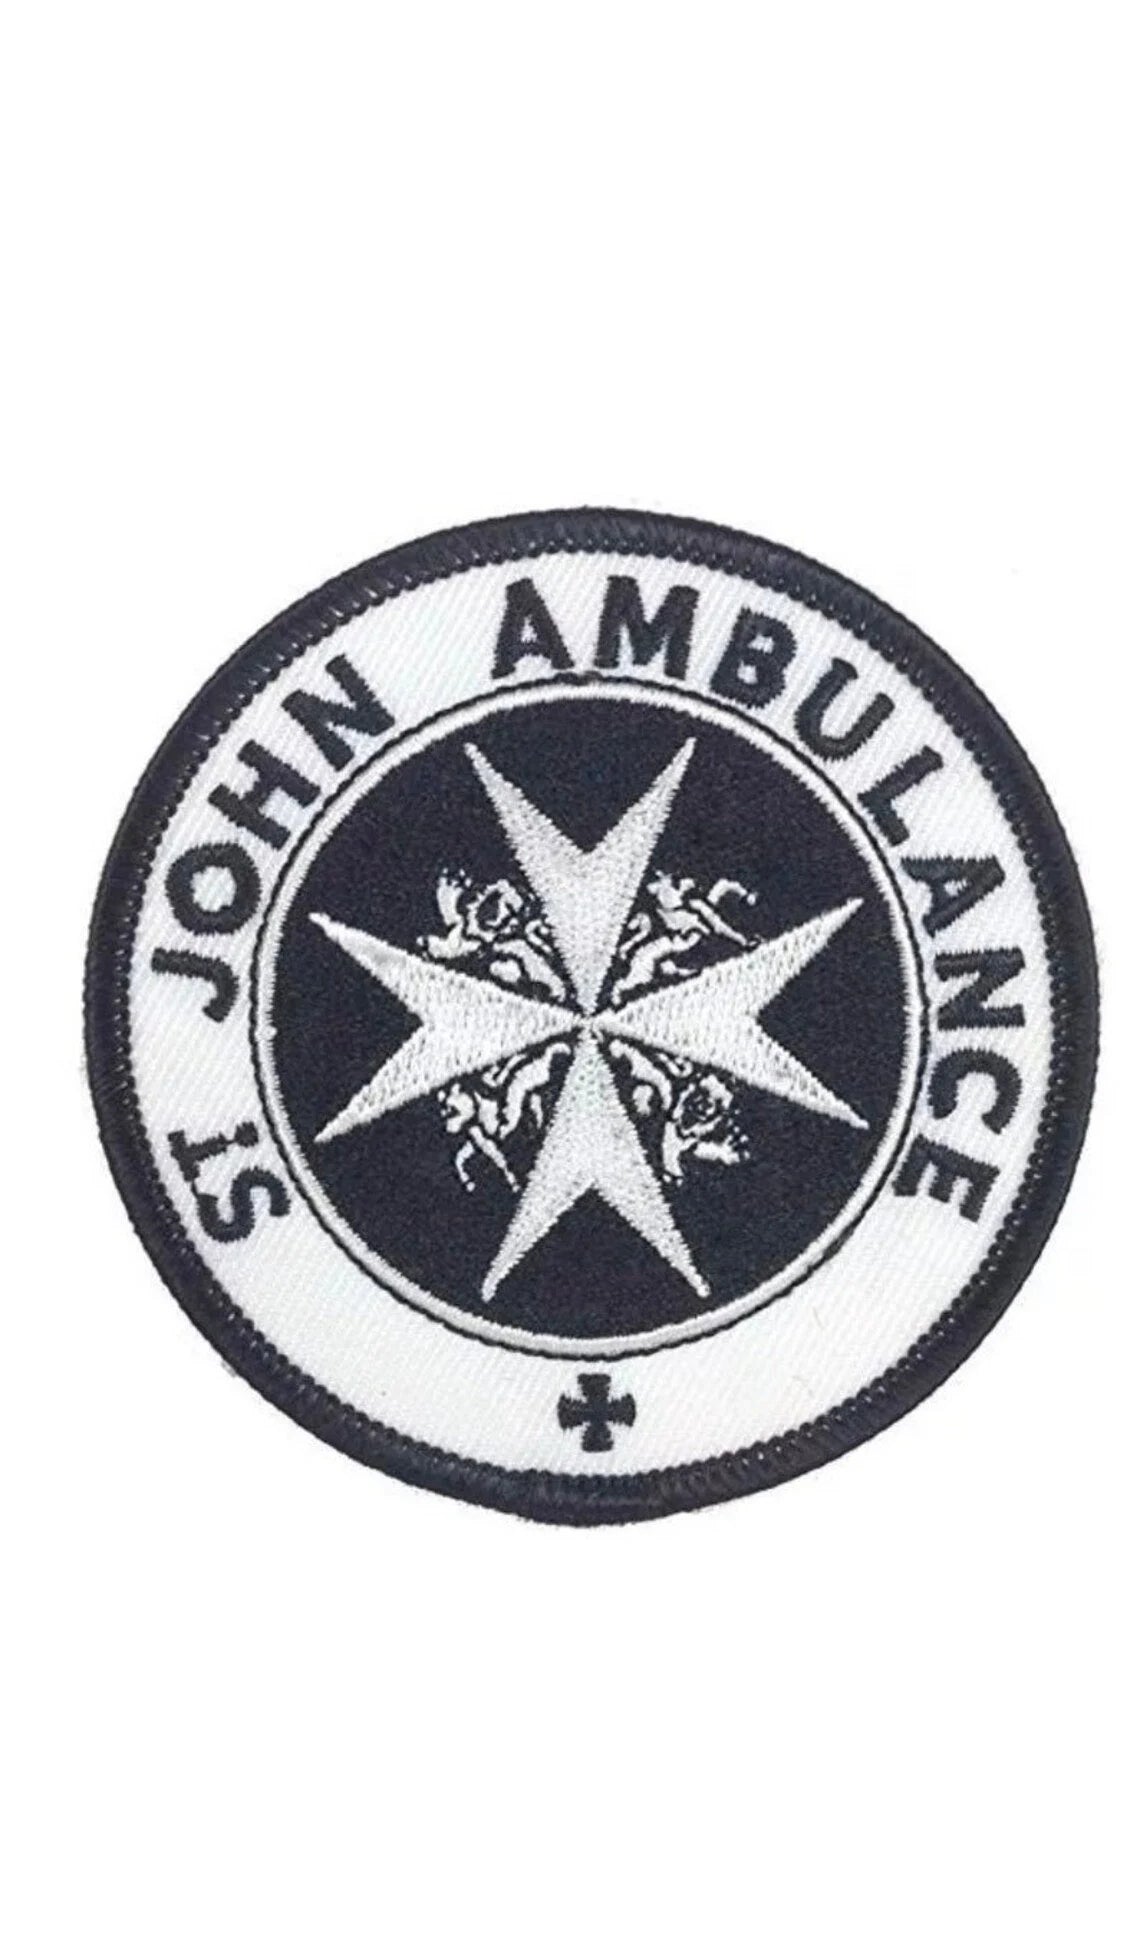 EMT Emergency Services First Responder Patch [Iron on Sew on -3.0 inch -MM2]